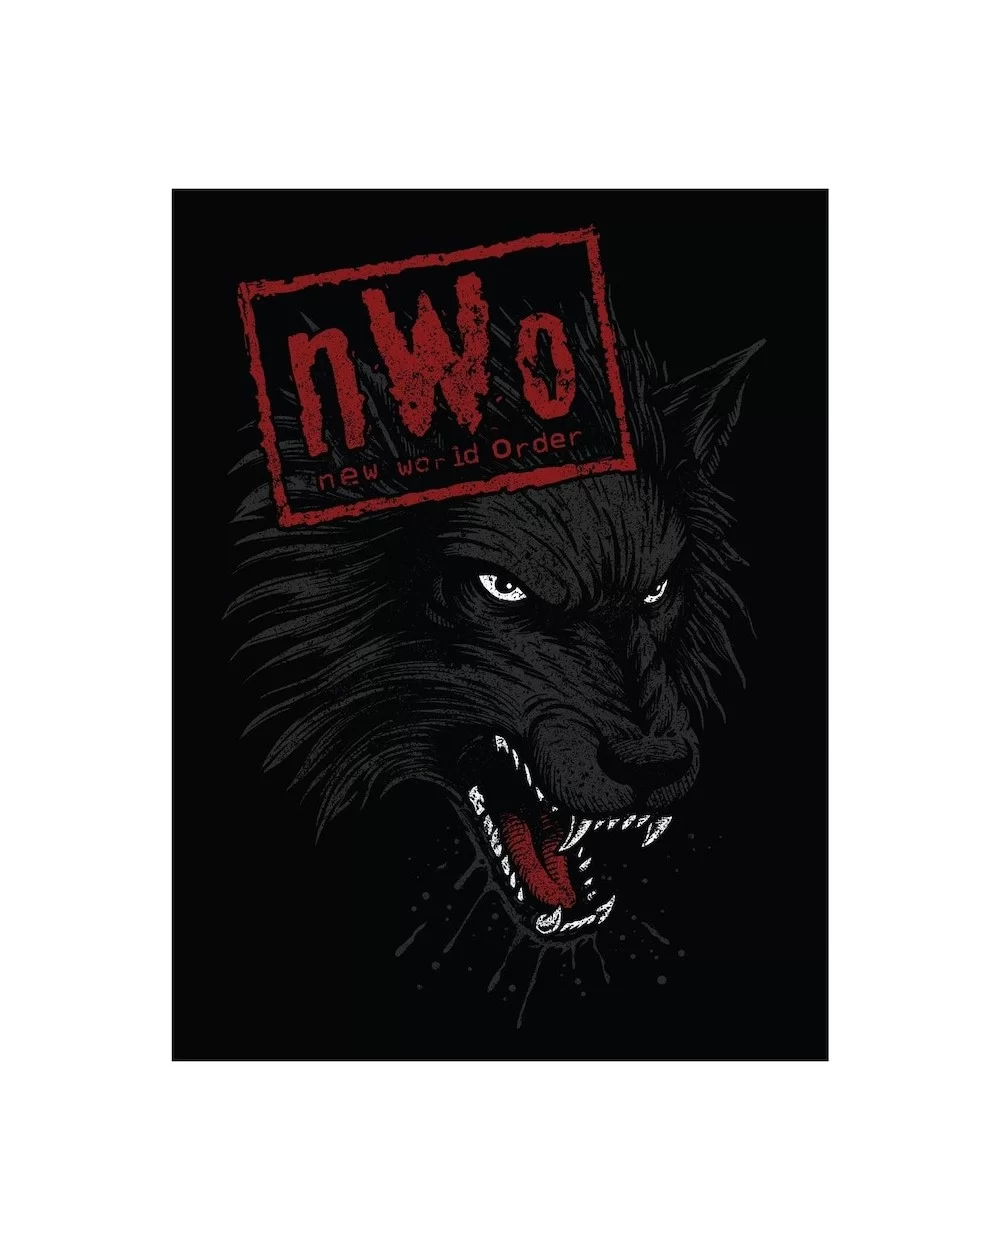 Fathead nWo Wolfpac Removable Superstar Mural Decal $18.24 Home & Office